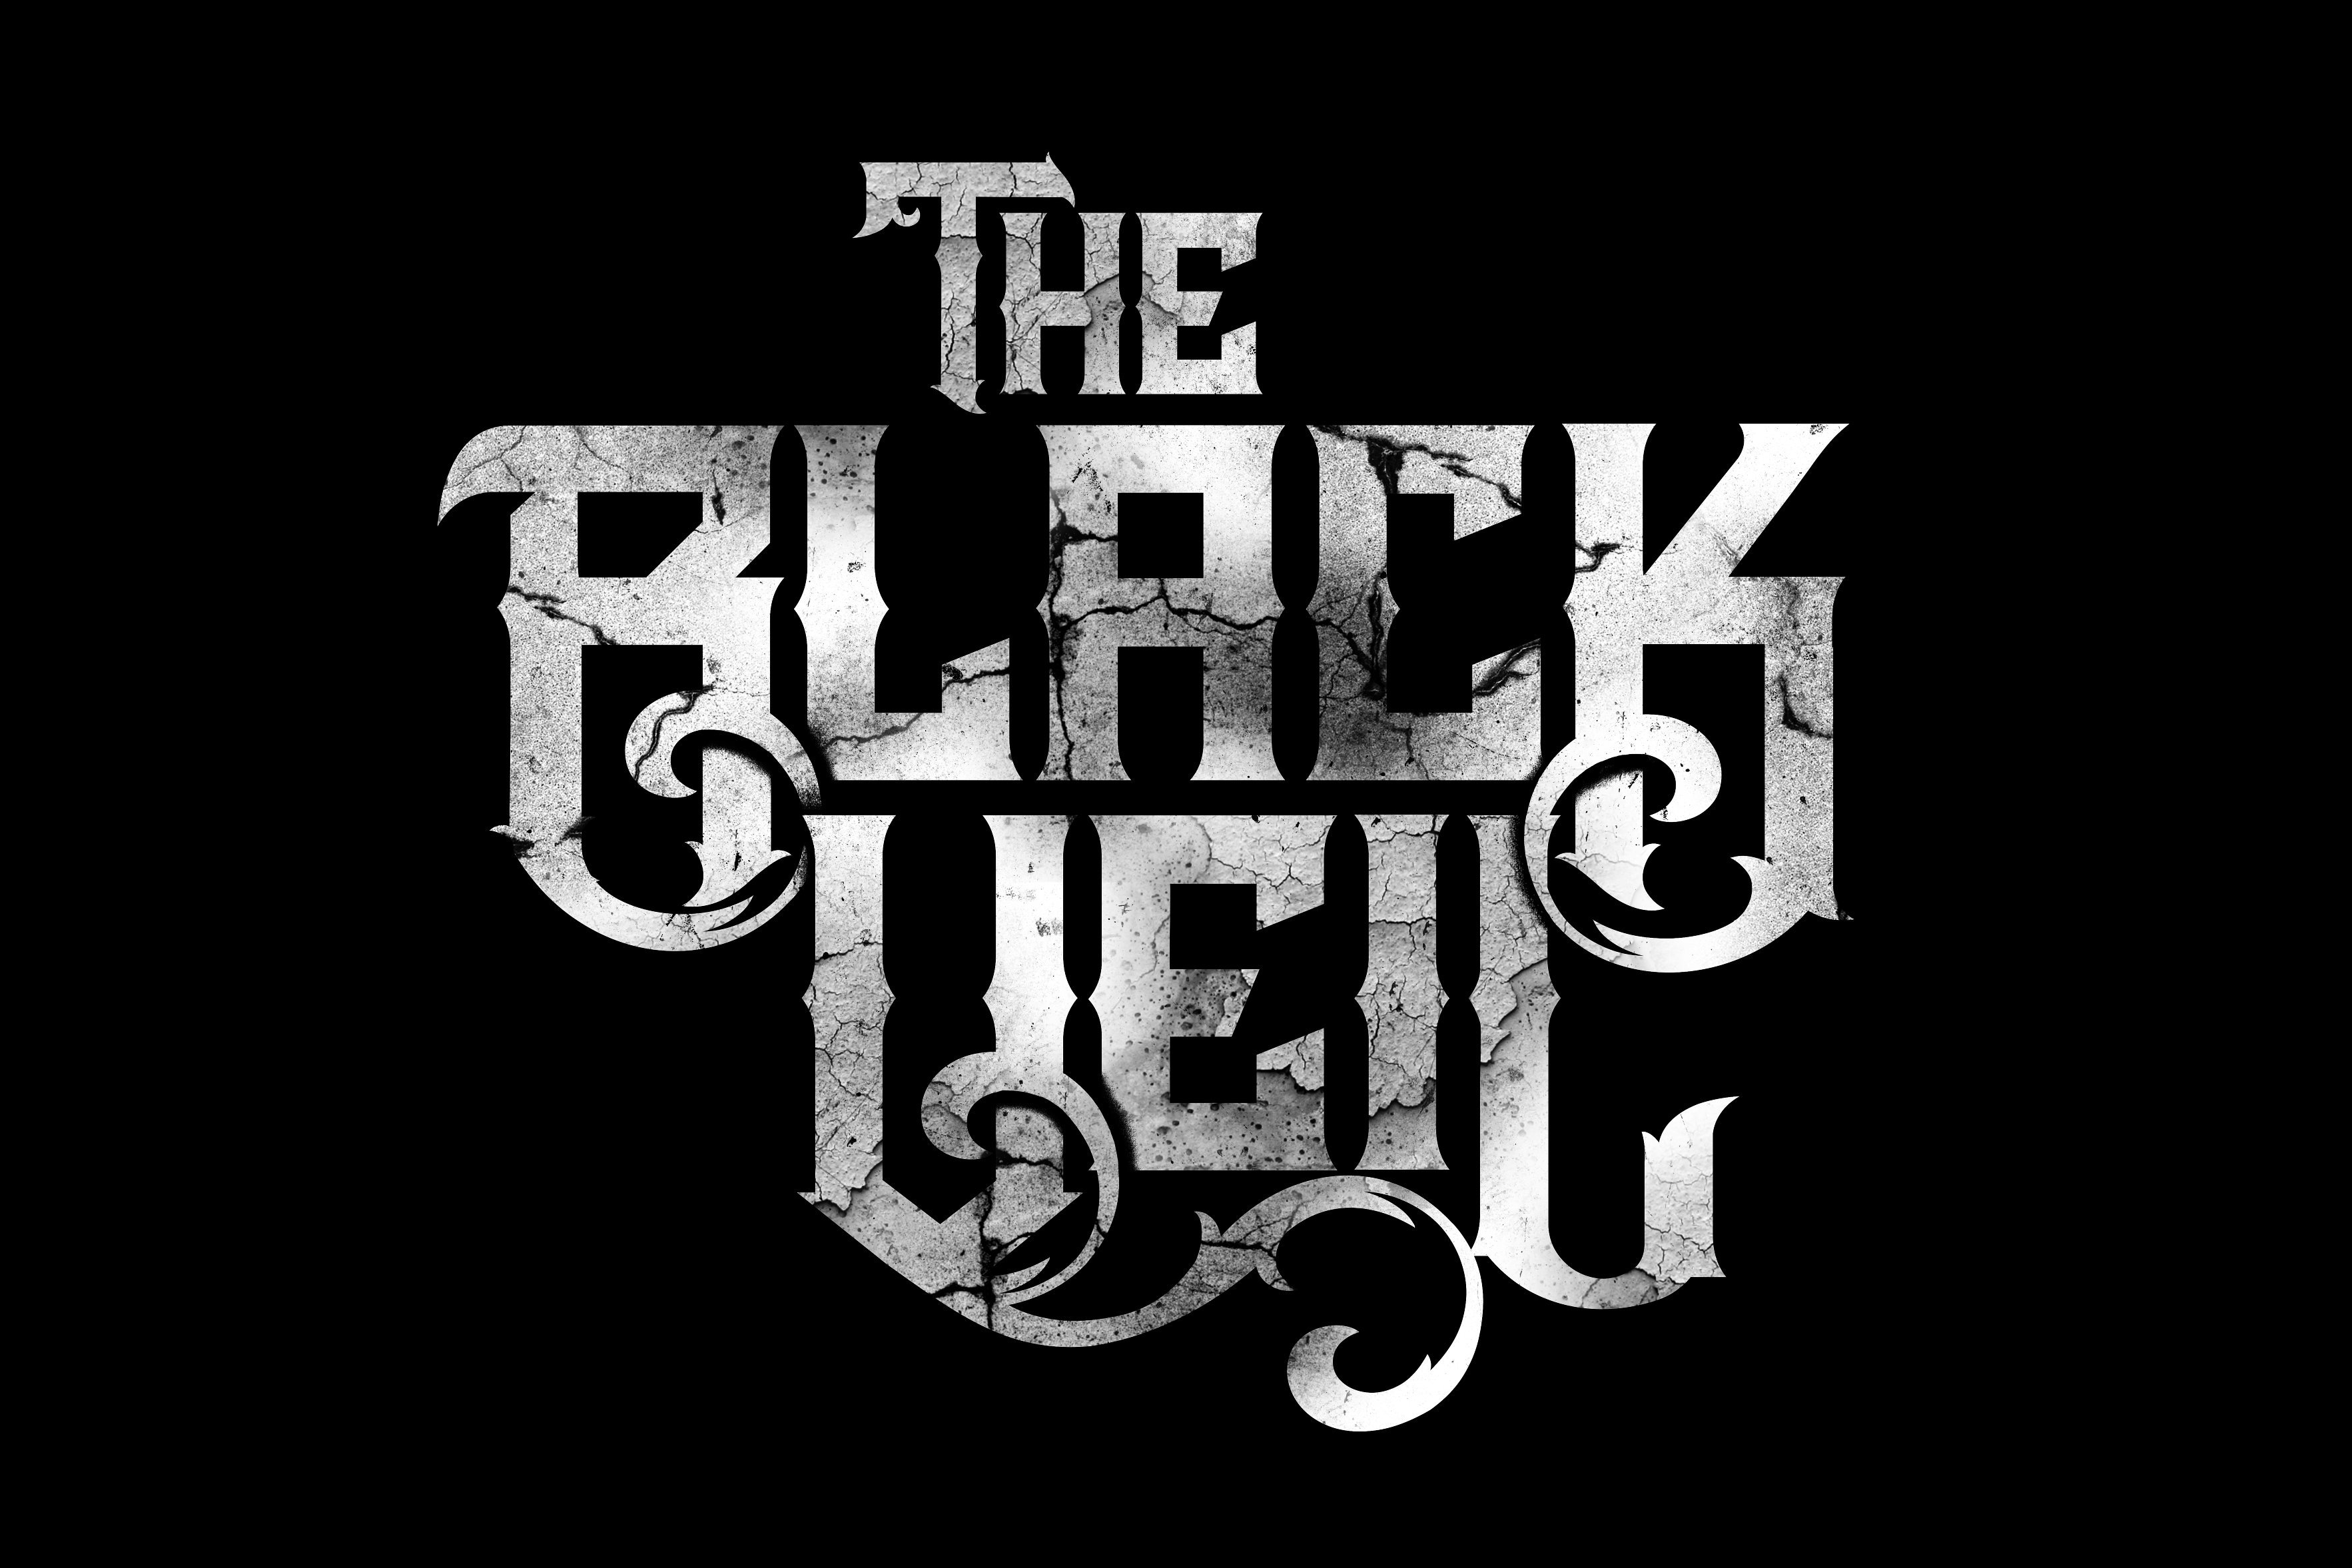 The Black Veil cover image.